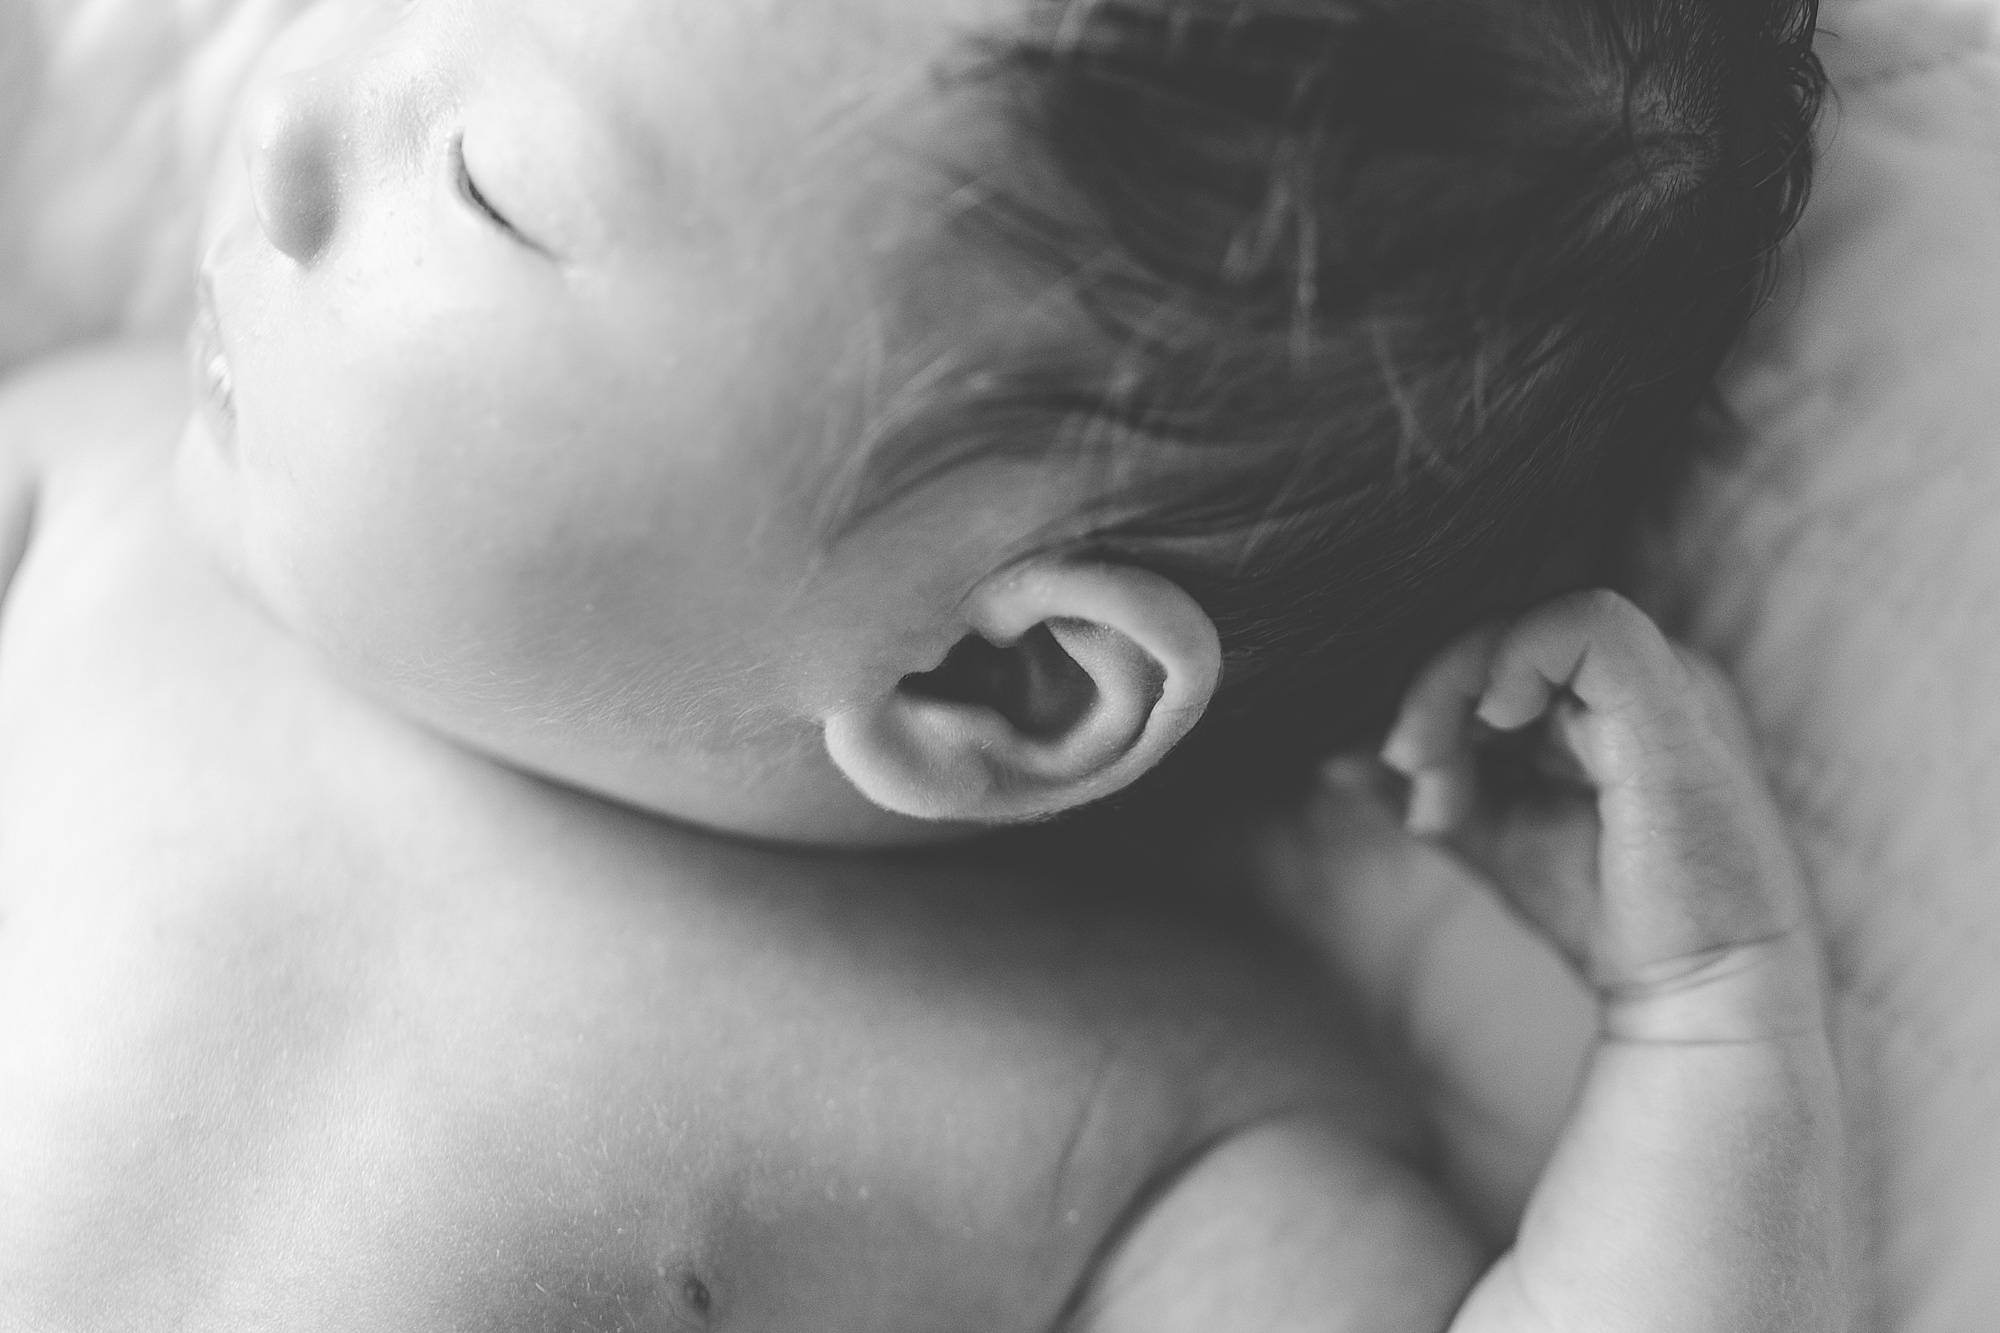 baby's ear closeup photographed during lifestyle newborn portraits